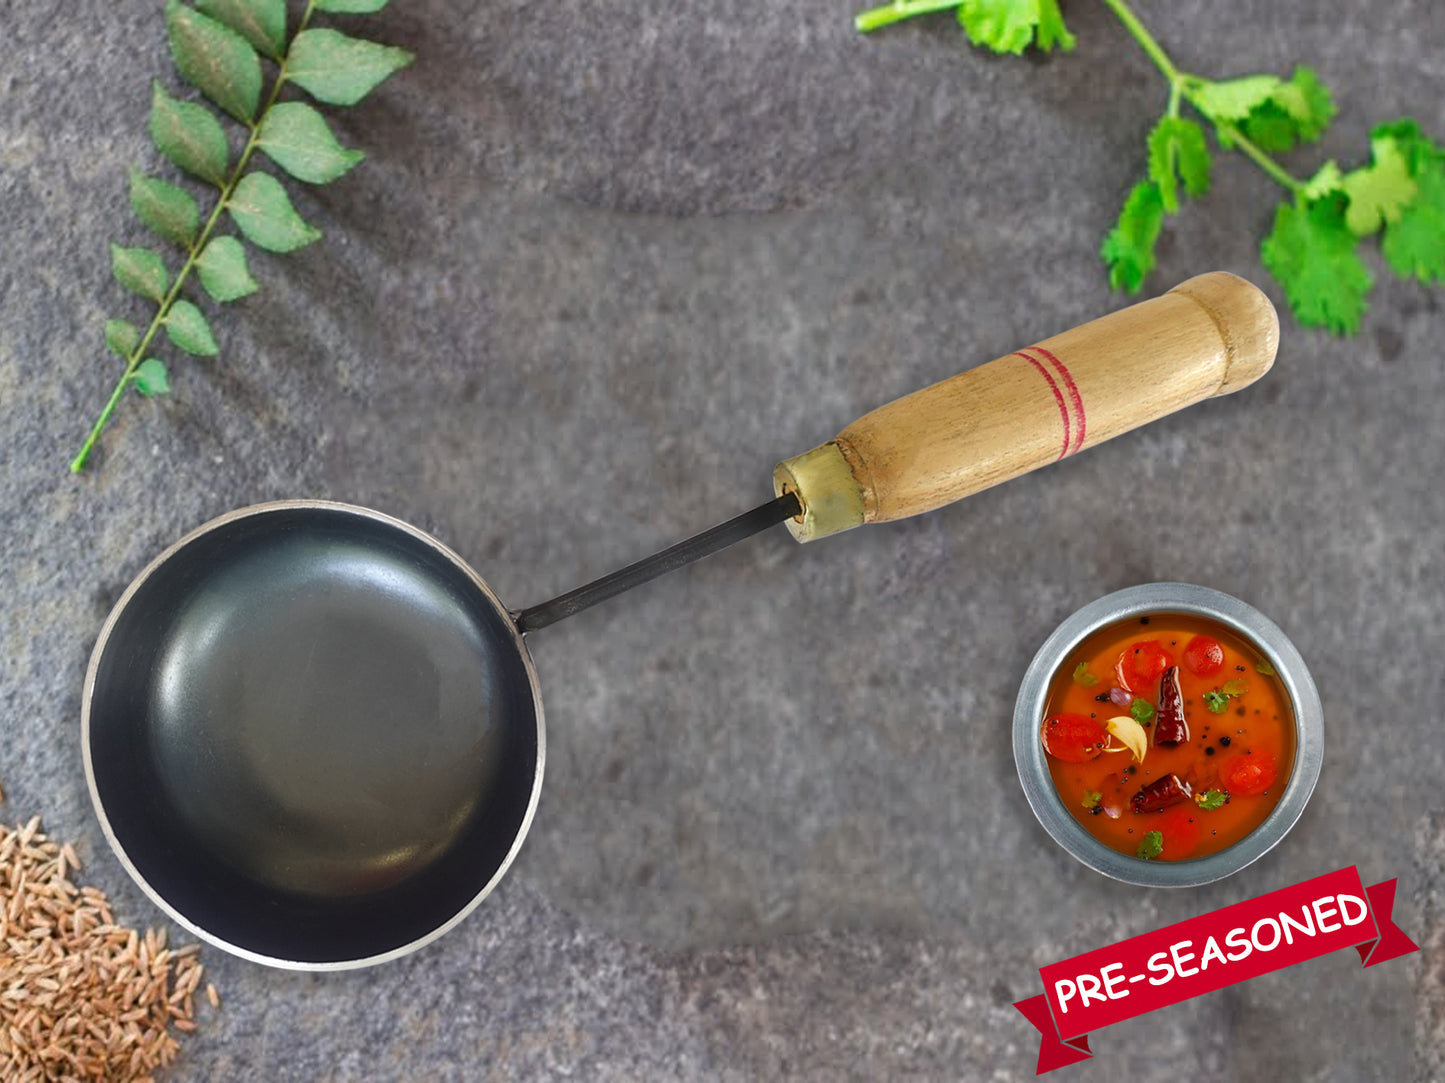 Combo Offer  -16 - Dosa Tawa - Cast Iron - Single Handle - Grinded - Chappathi Tawa Ferrous - Cast Iron -  Deep Kadai Cast Iron - Non Grinded - 8 Inch Dia - With Lid .